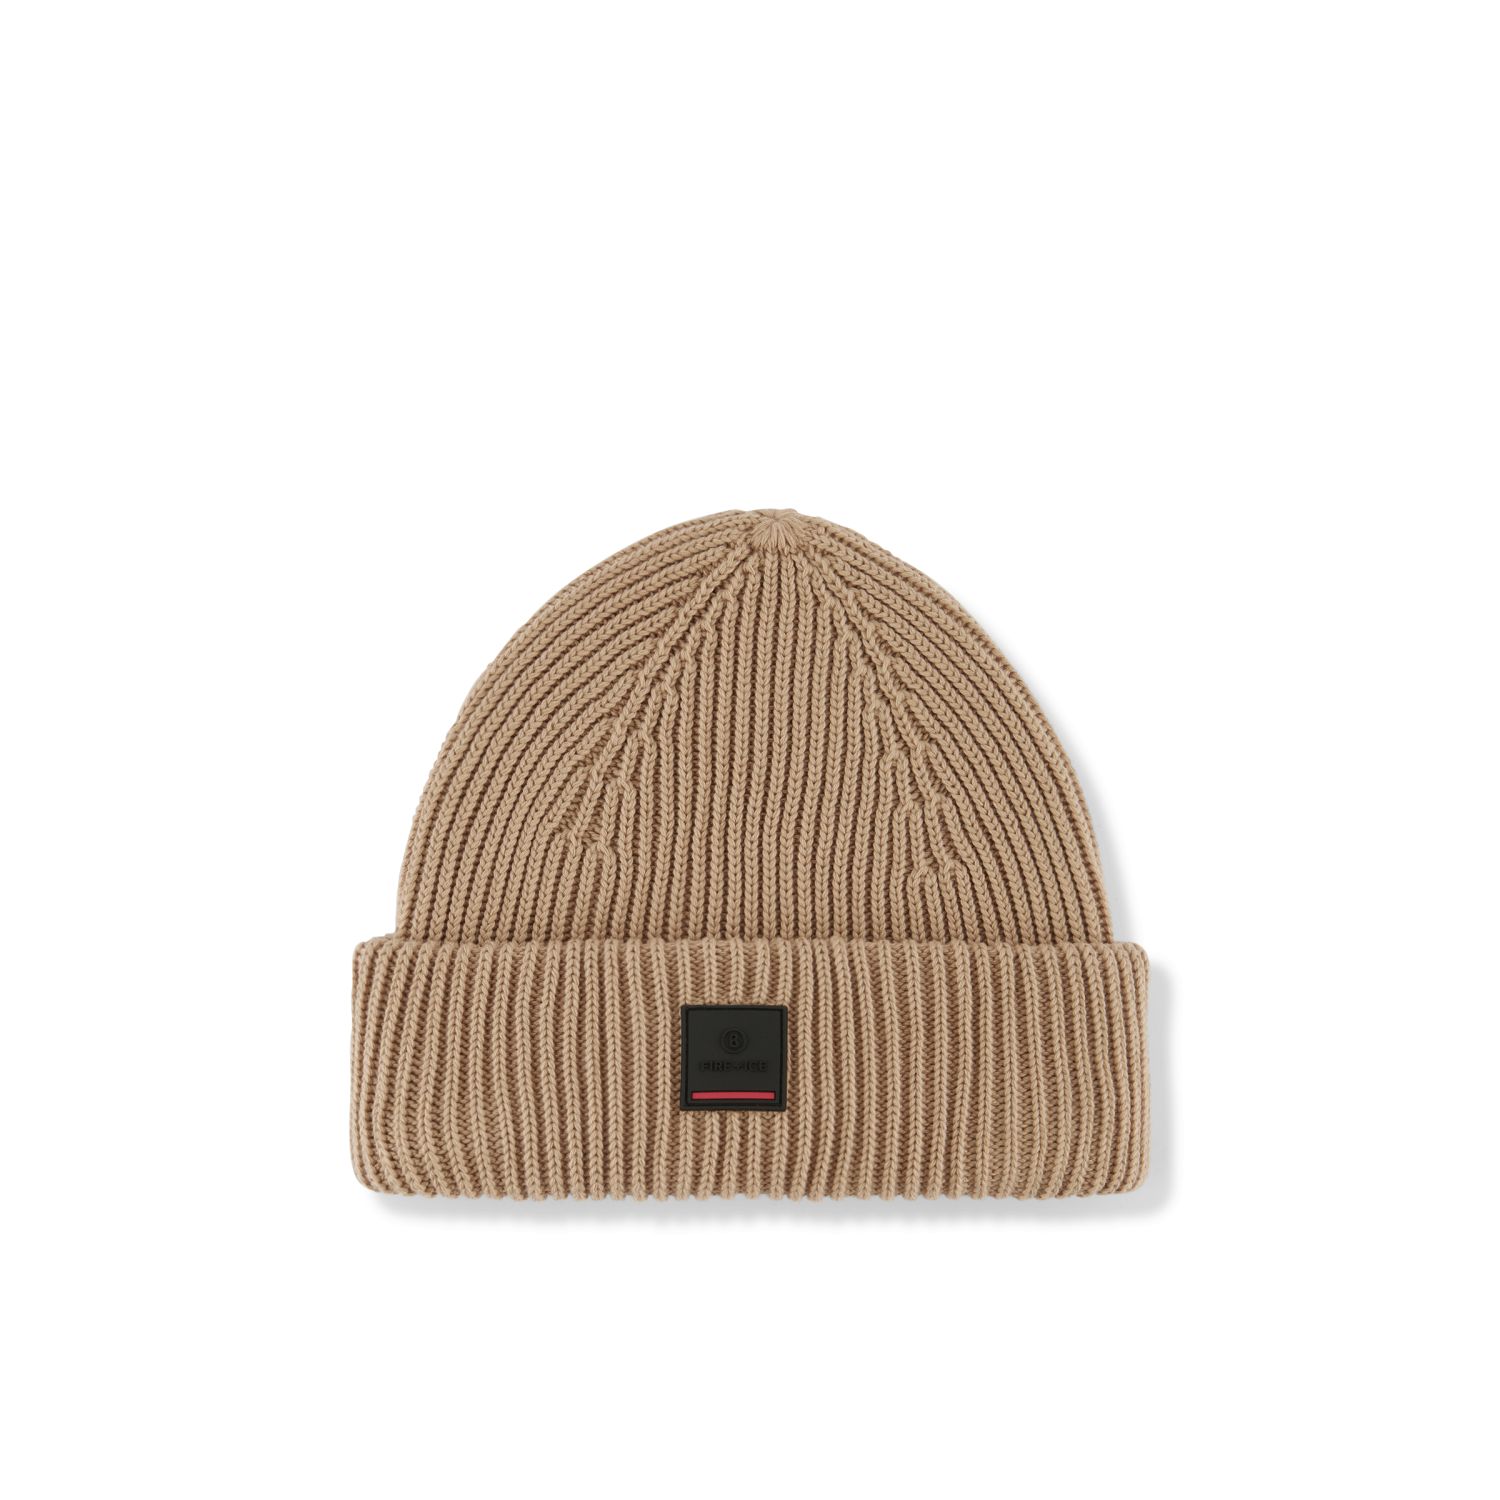 Hats -  bogner fire and ice ROBB Knitted Hat